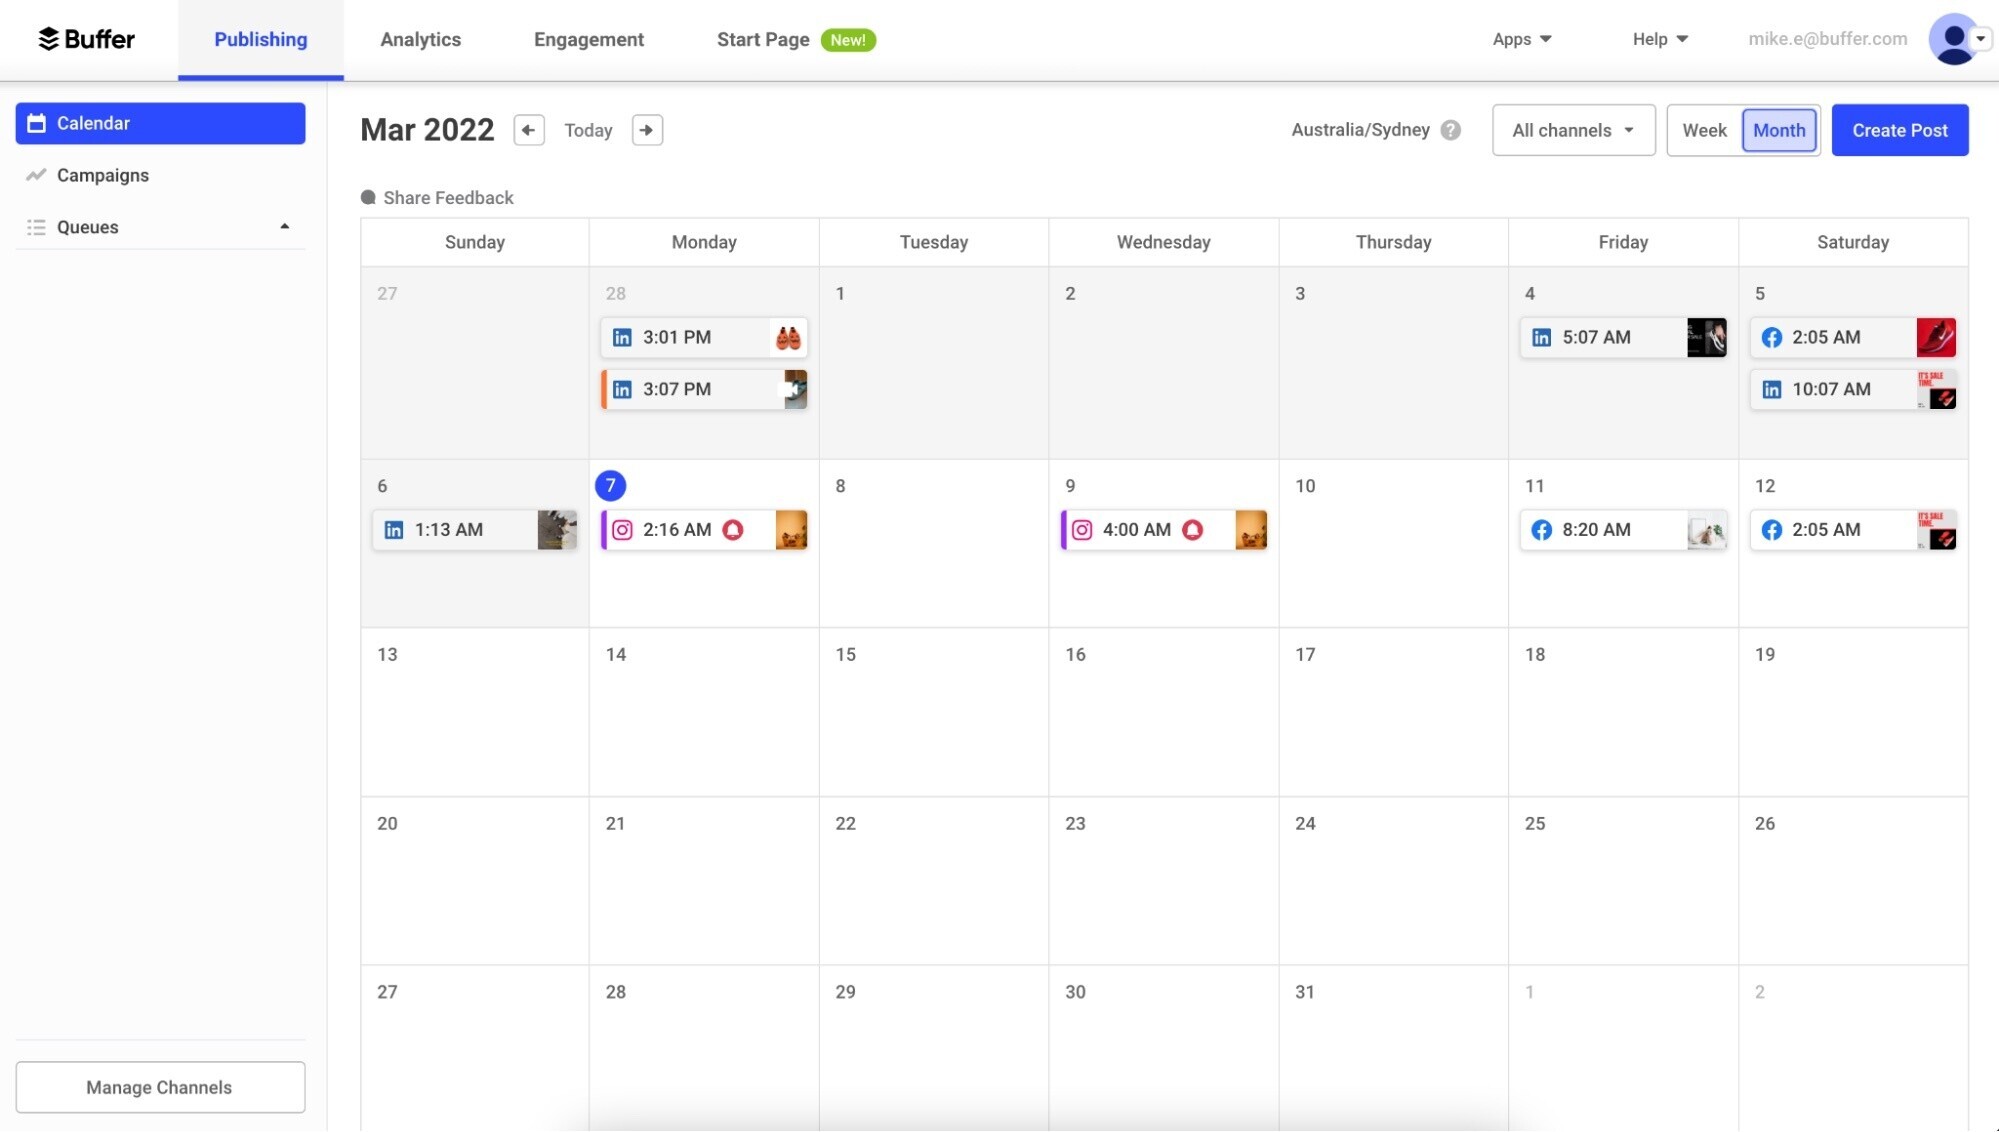 Buffer displays a monthly social media publishing calendar with multiple posts across LinkedIn, Facebook, and Instagram